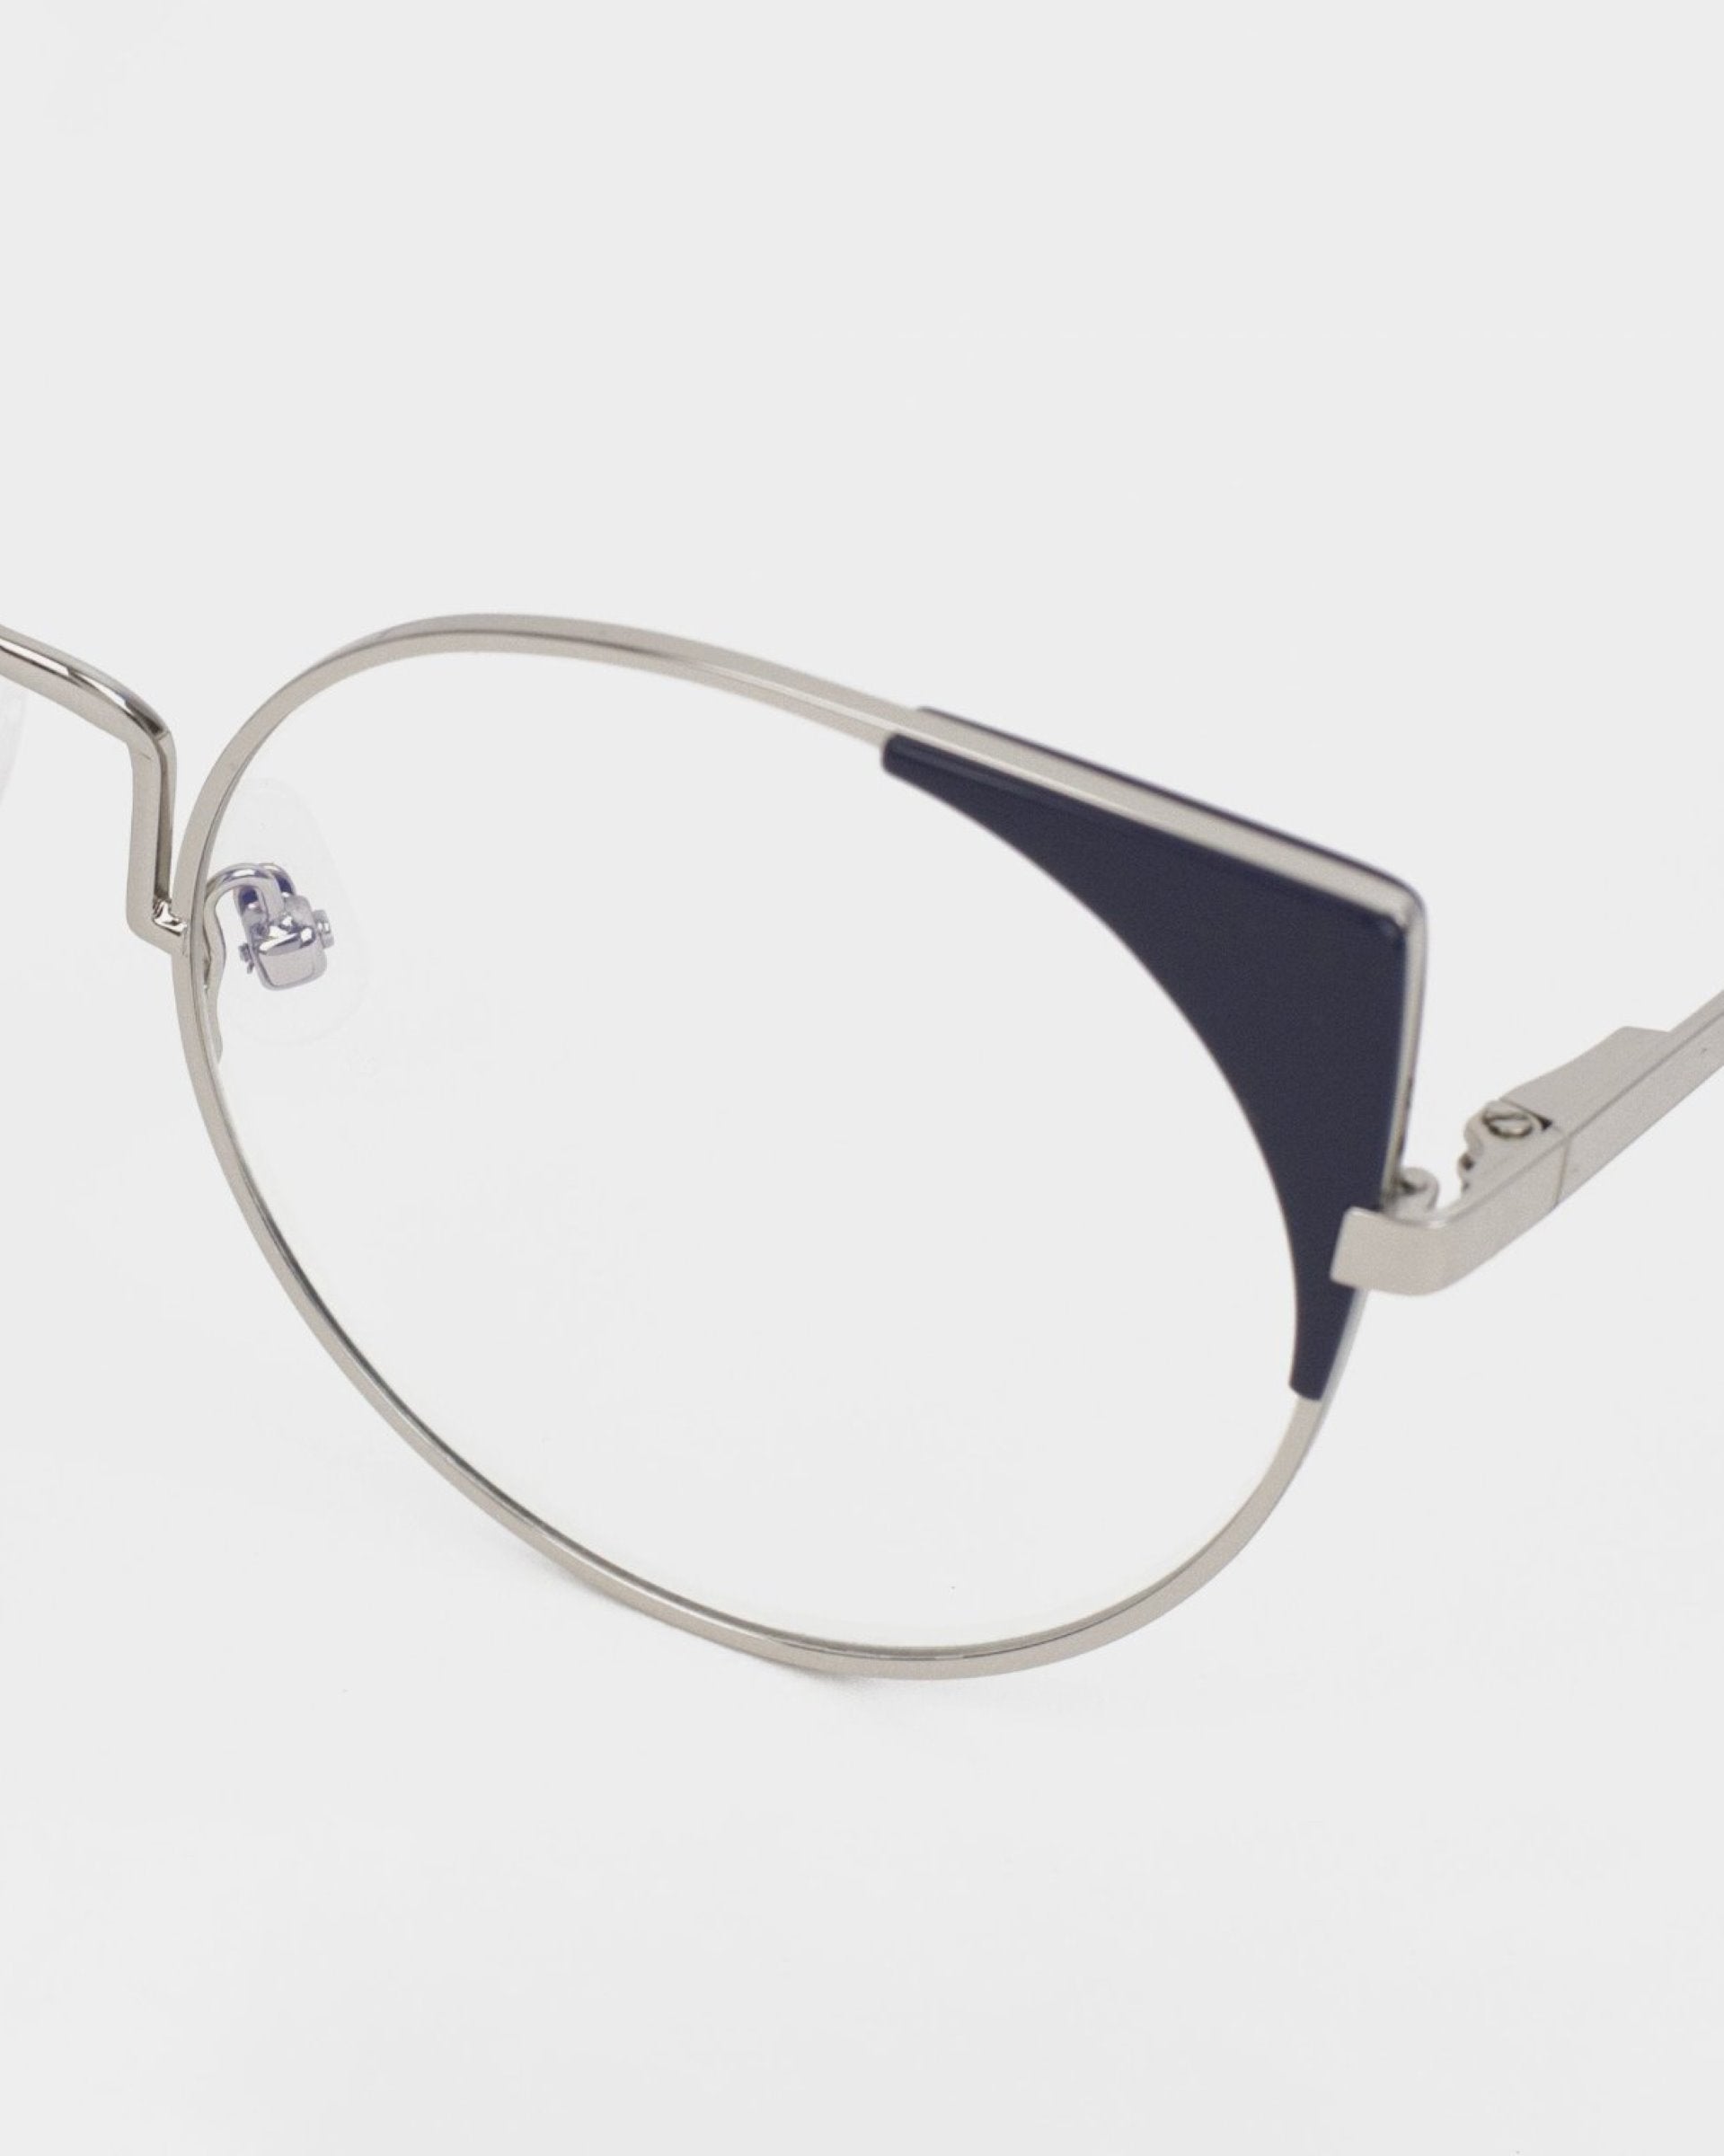 A close-up of Brisky metal-framed glasses with a cat-eye design by For Art&#39;s Sake®. The frame is silver with black accents on the upper outer corners of the lenses, featuring a blue light filter. The background is plain white, highlighting the sleek and modern design of these glasses.